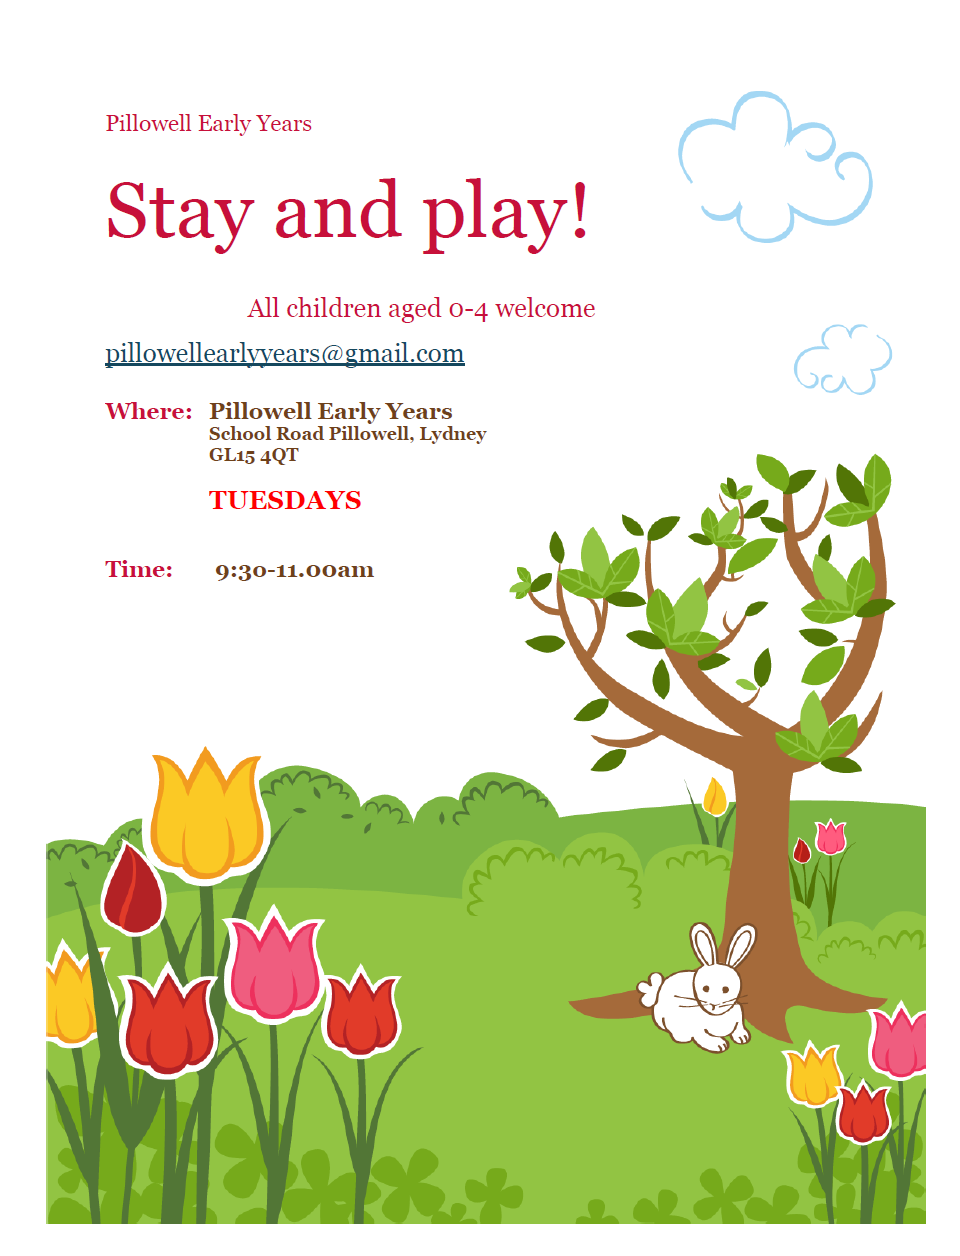 Stay and Play. All childen aged 0-4 welcome. Tuesdays 9.30-11am.